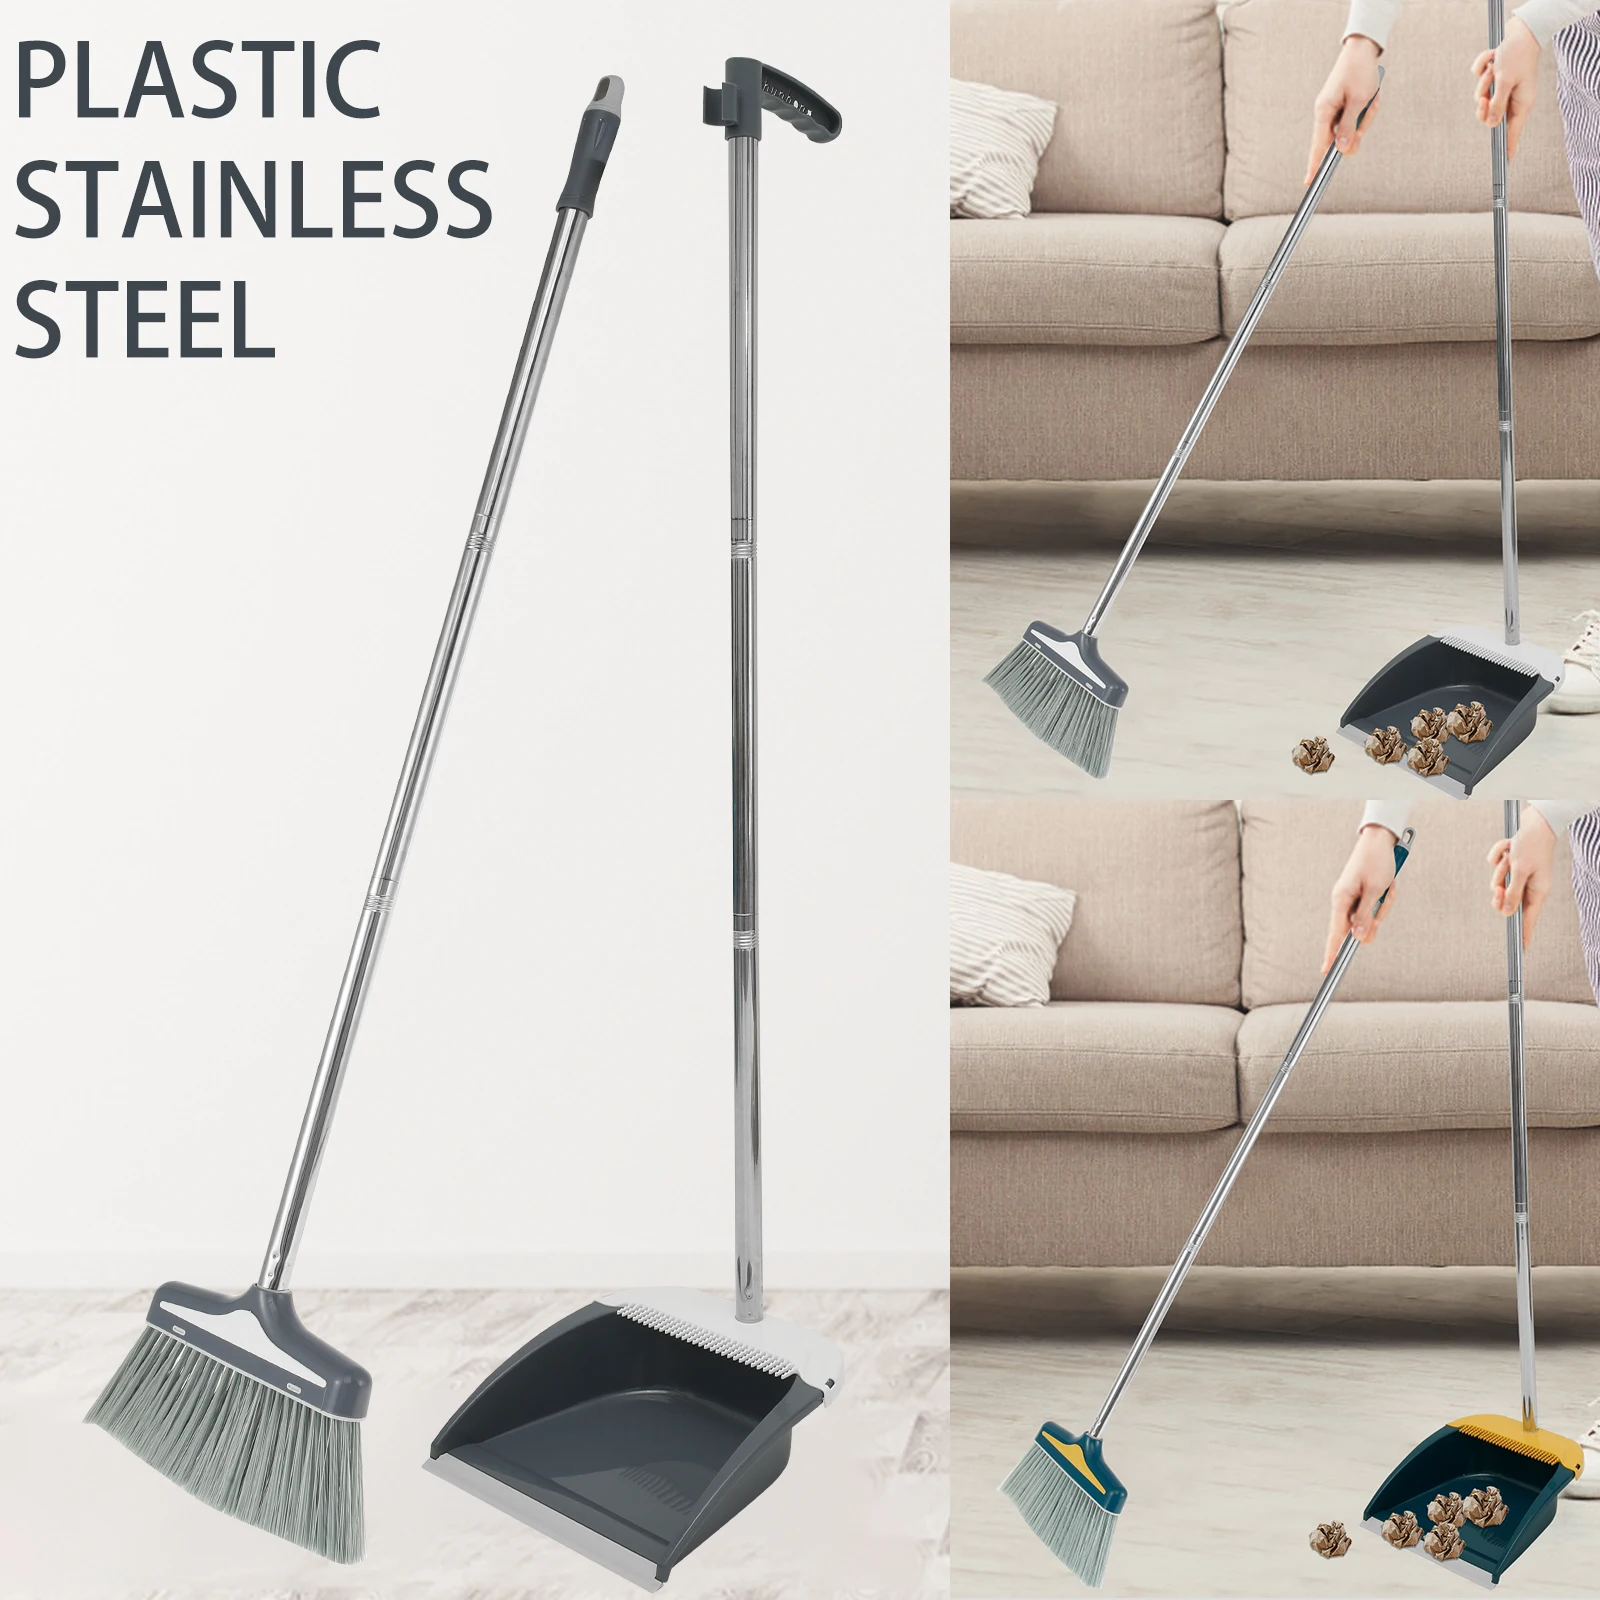 https://ae01.alicdn.com/kf/Se7d3d5413d58420d99735dd0a3c80626E/2Pcs-Broom-and-Dustpan-Set-with-Long-Handle-Retractable-Upright-Broom-Dustpan-50-4-Inch-Extendable.jpg